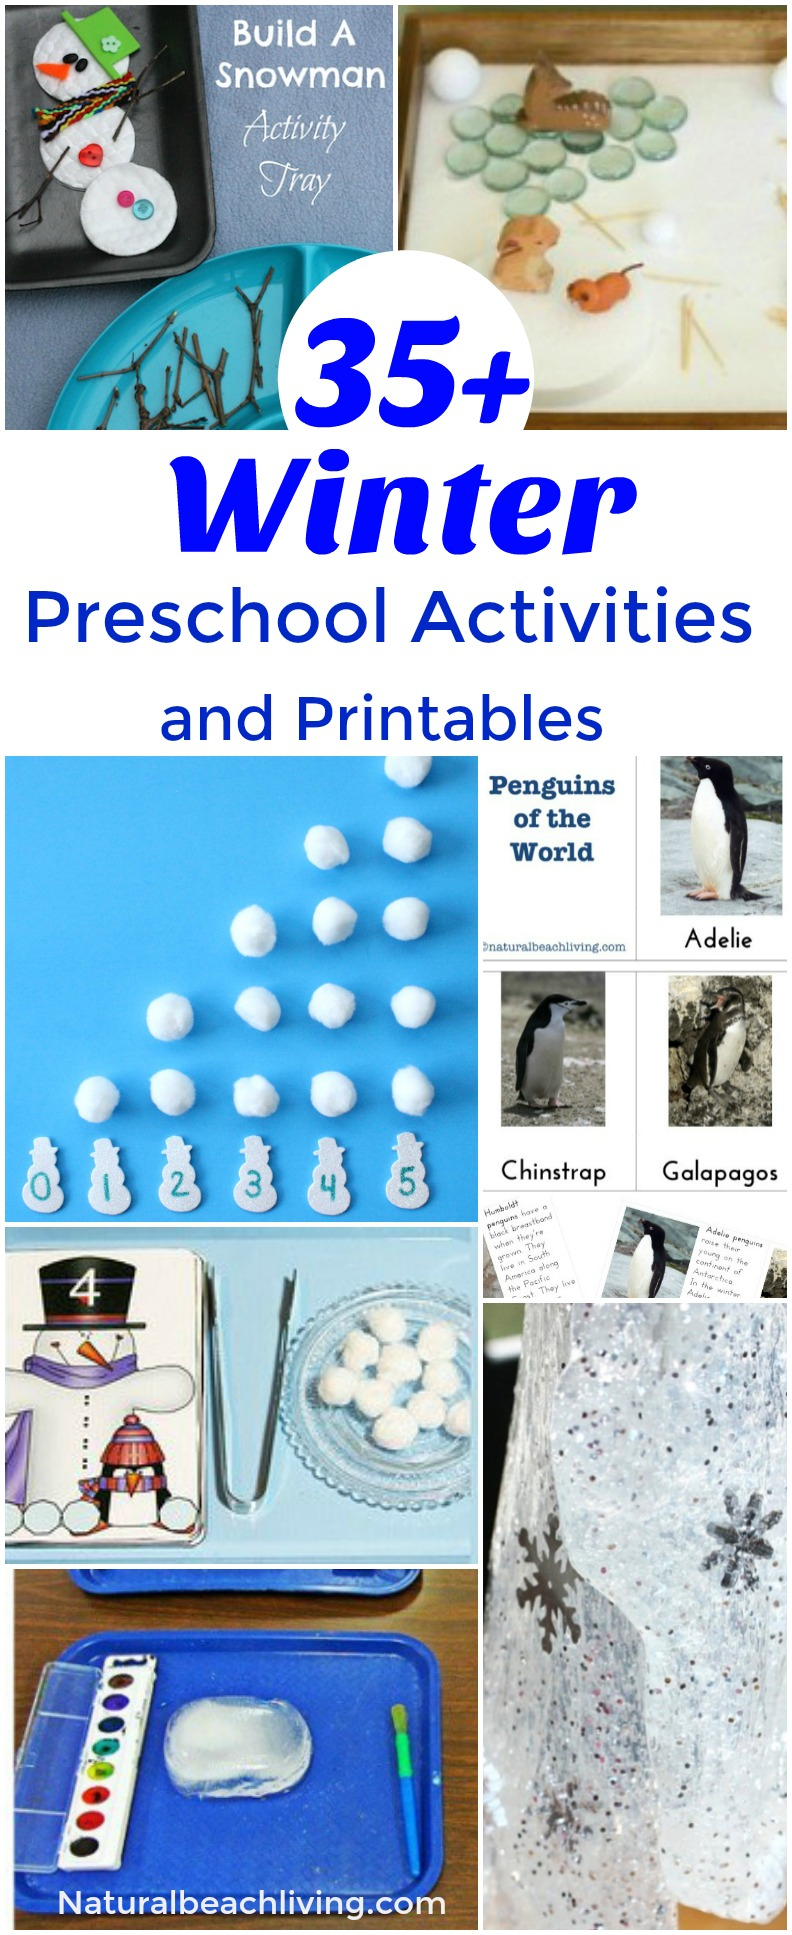 21+ January Preschool Themes With Lesson Plans And